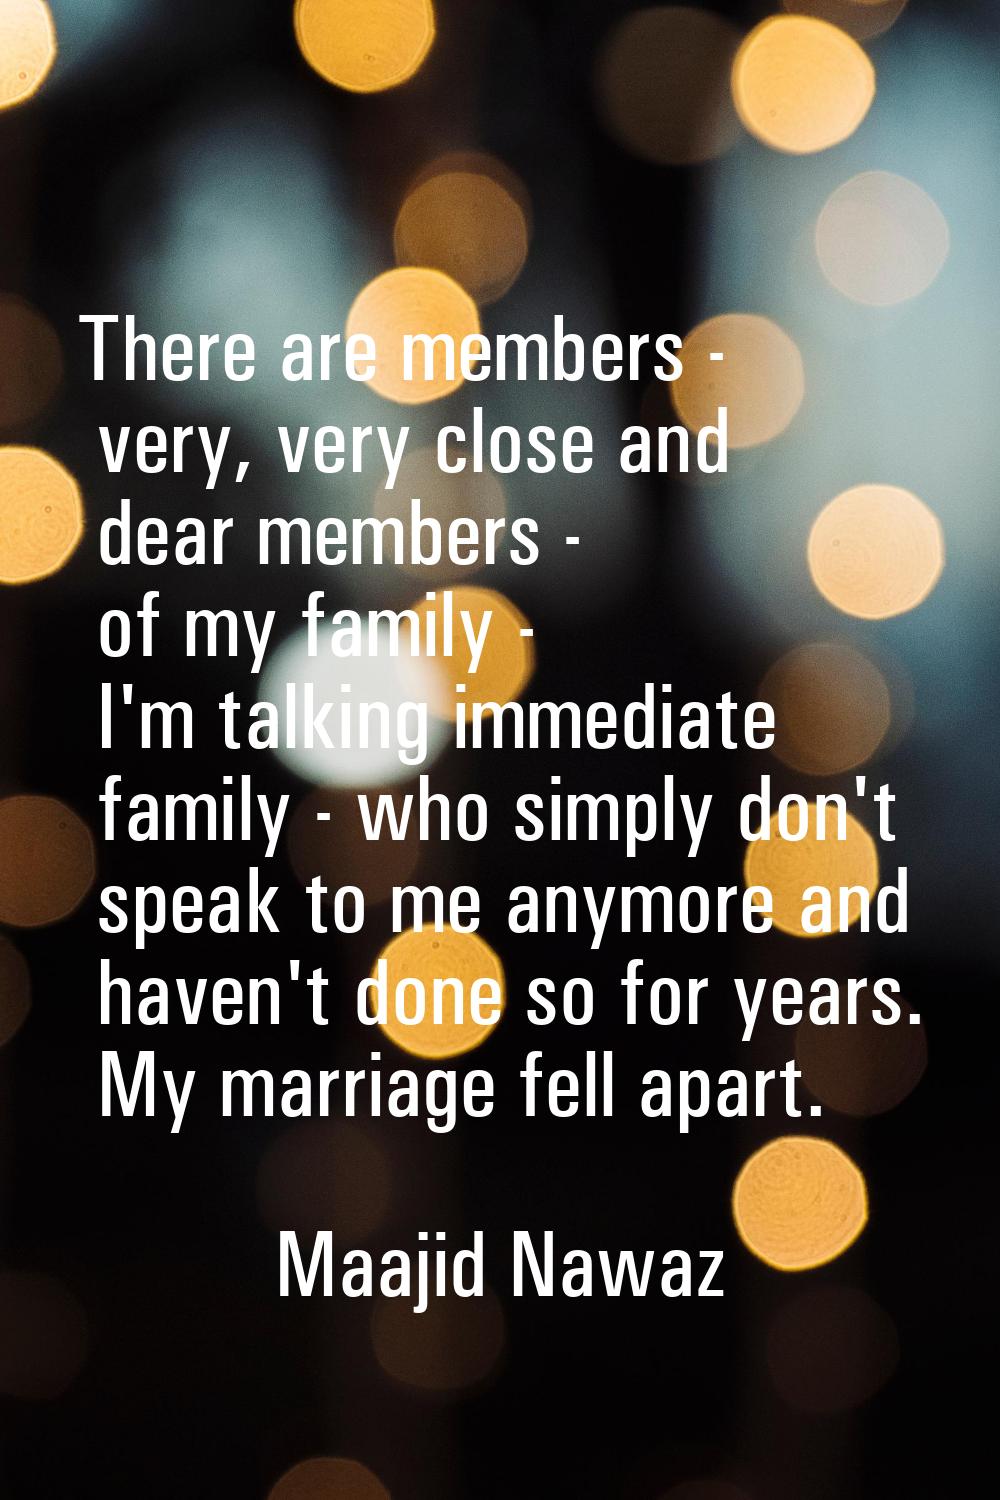 There are members - very, very close and dear members - of my family - I'm talking immediate family